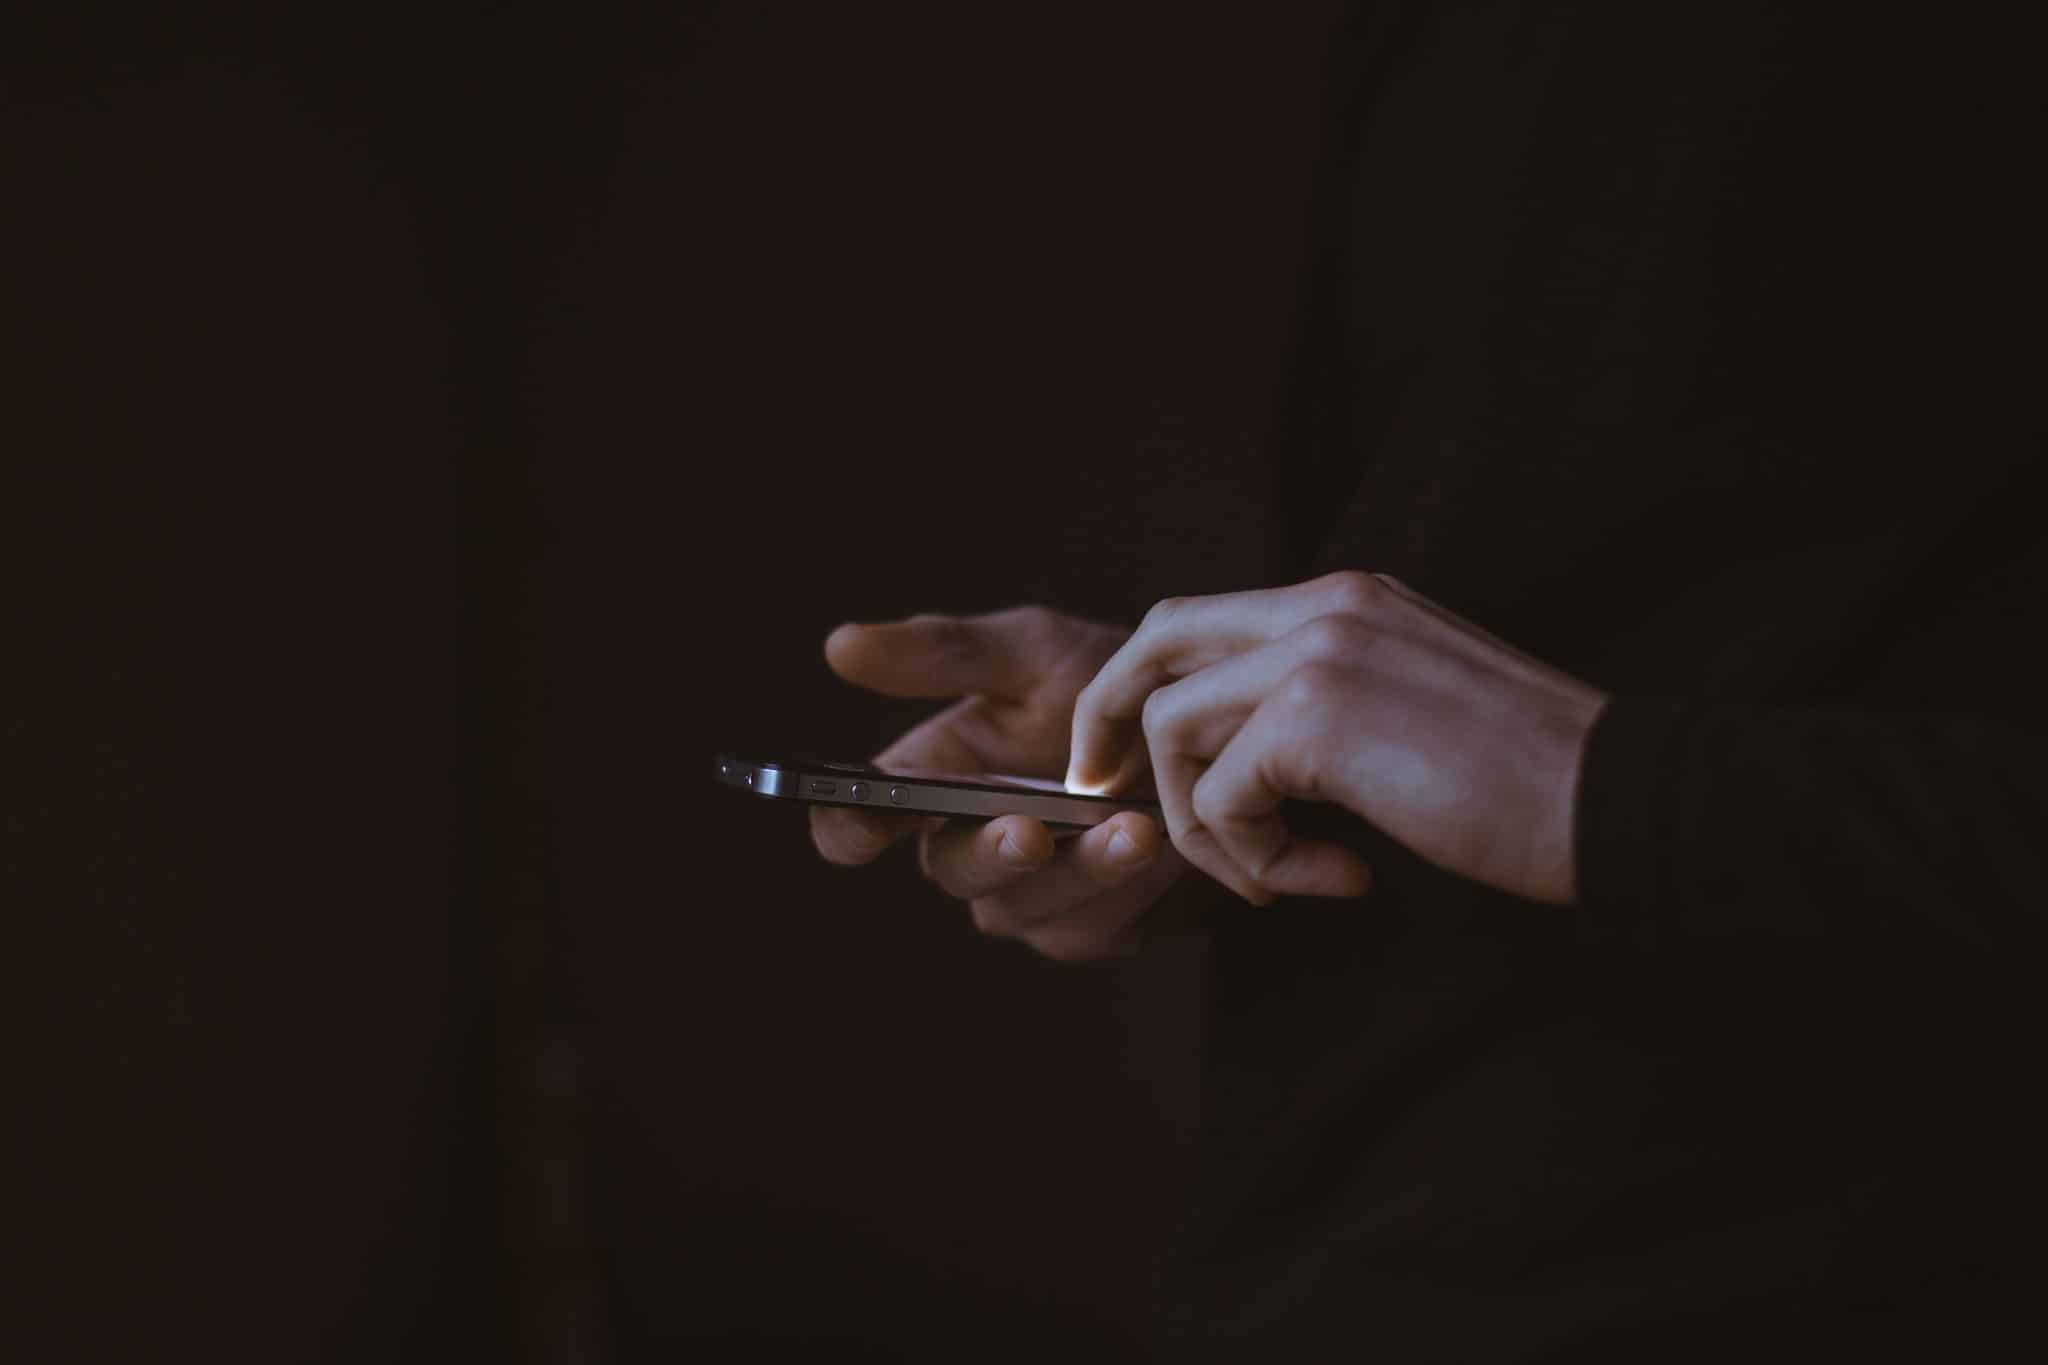 Photo of a woman's hands taken as she's on her smartphone in a room with a black background.